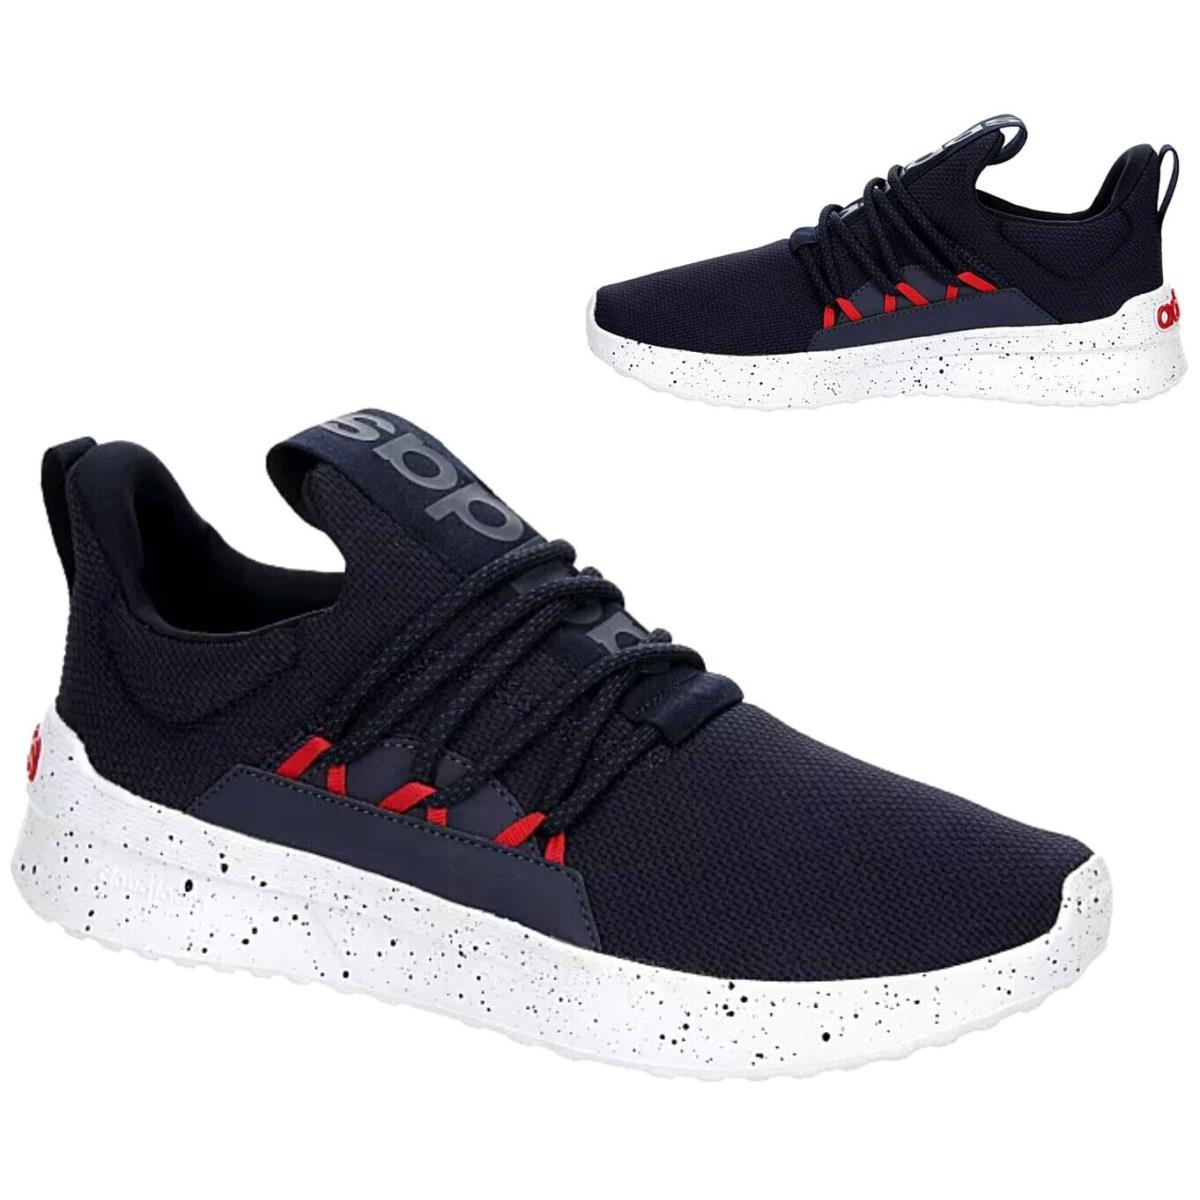 Adidas Racer Adapt Athletic Sneaker Casual Shoes Mens Blue Red All Sizes - Blue